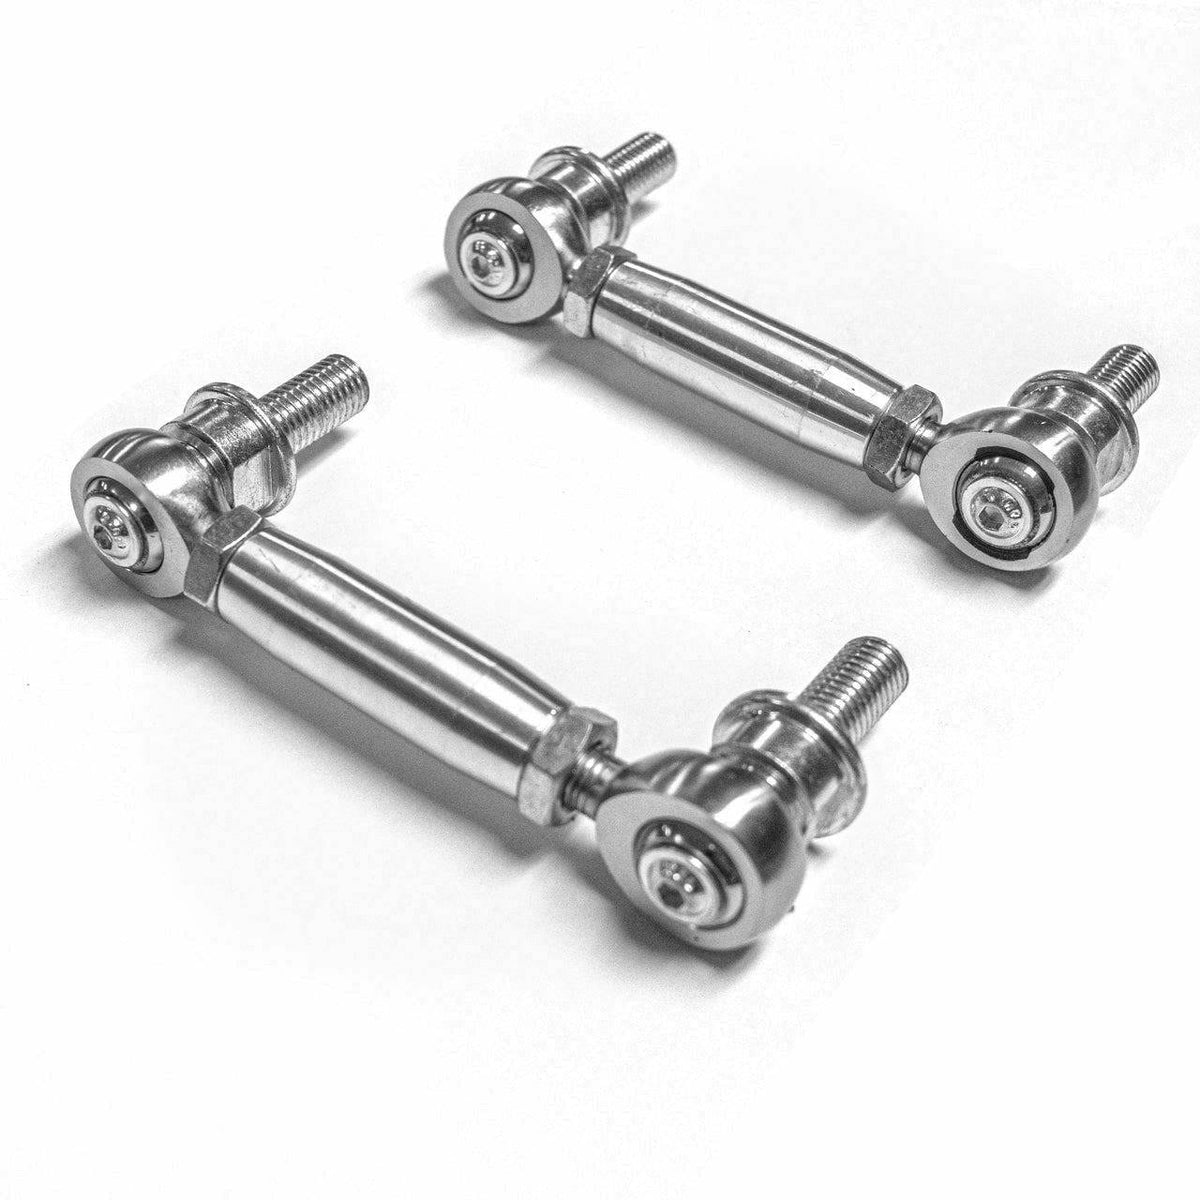 S3 Power Sports Can Am Maverick X3 Front Sway Bar Links